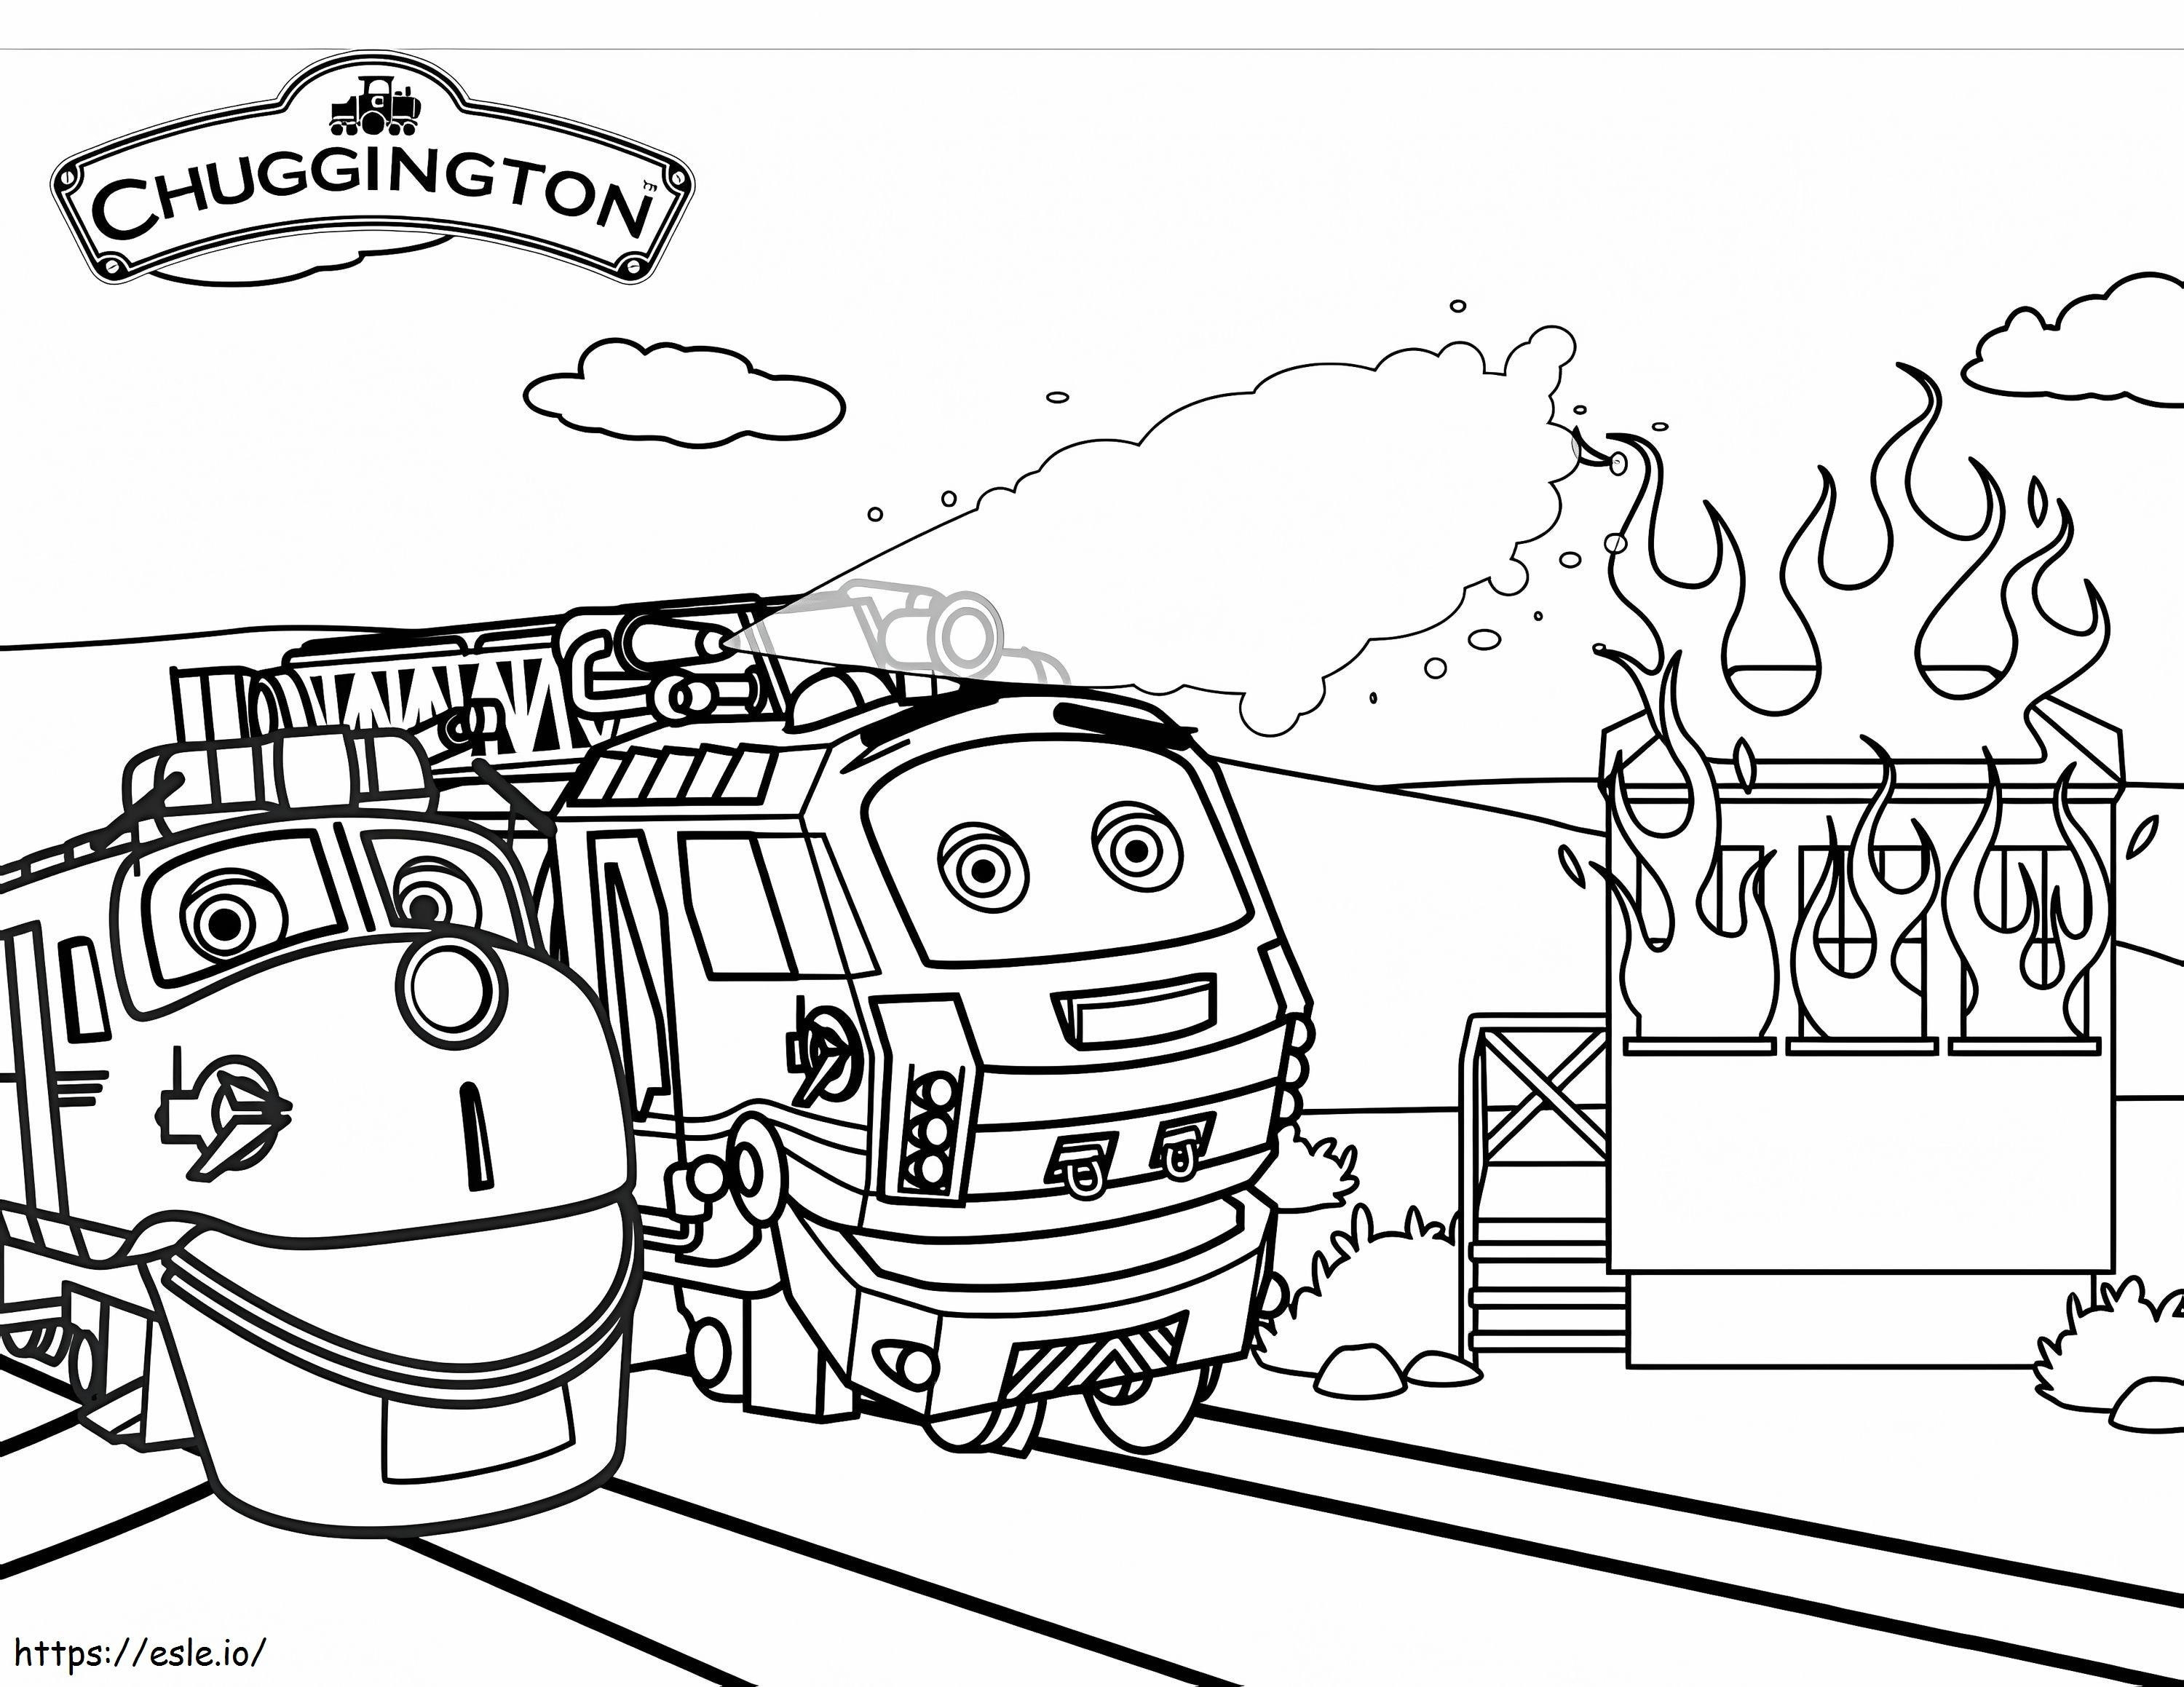 Characters From Chuggington coloring page